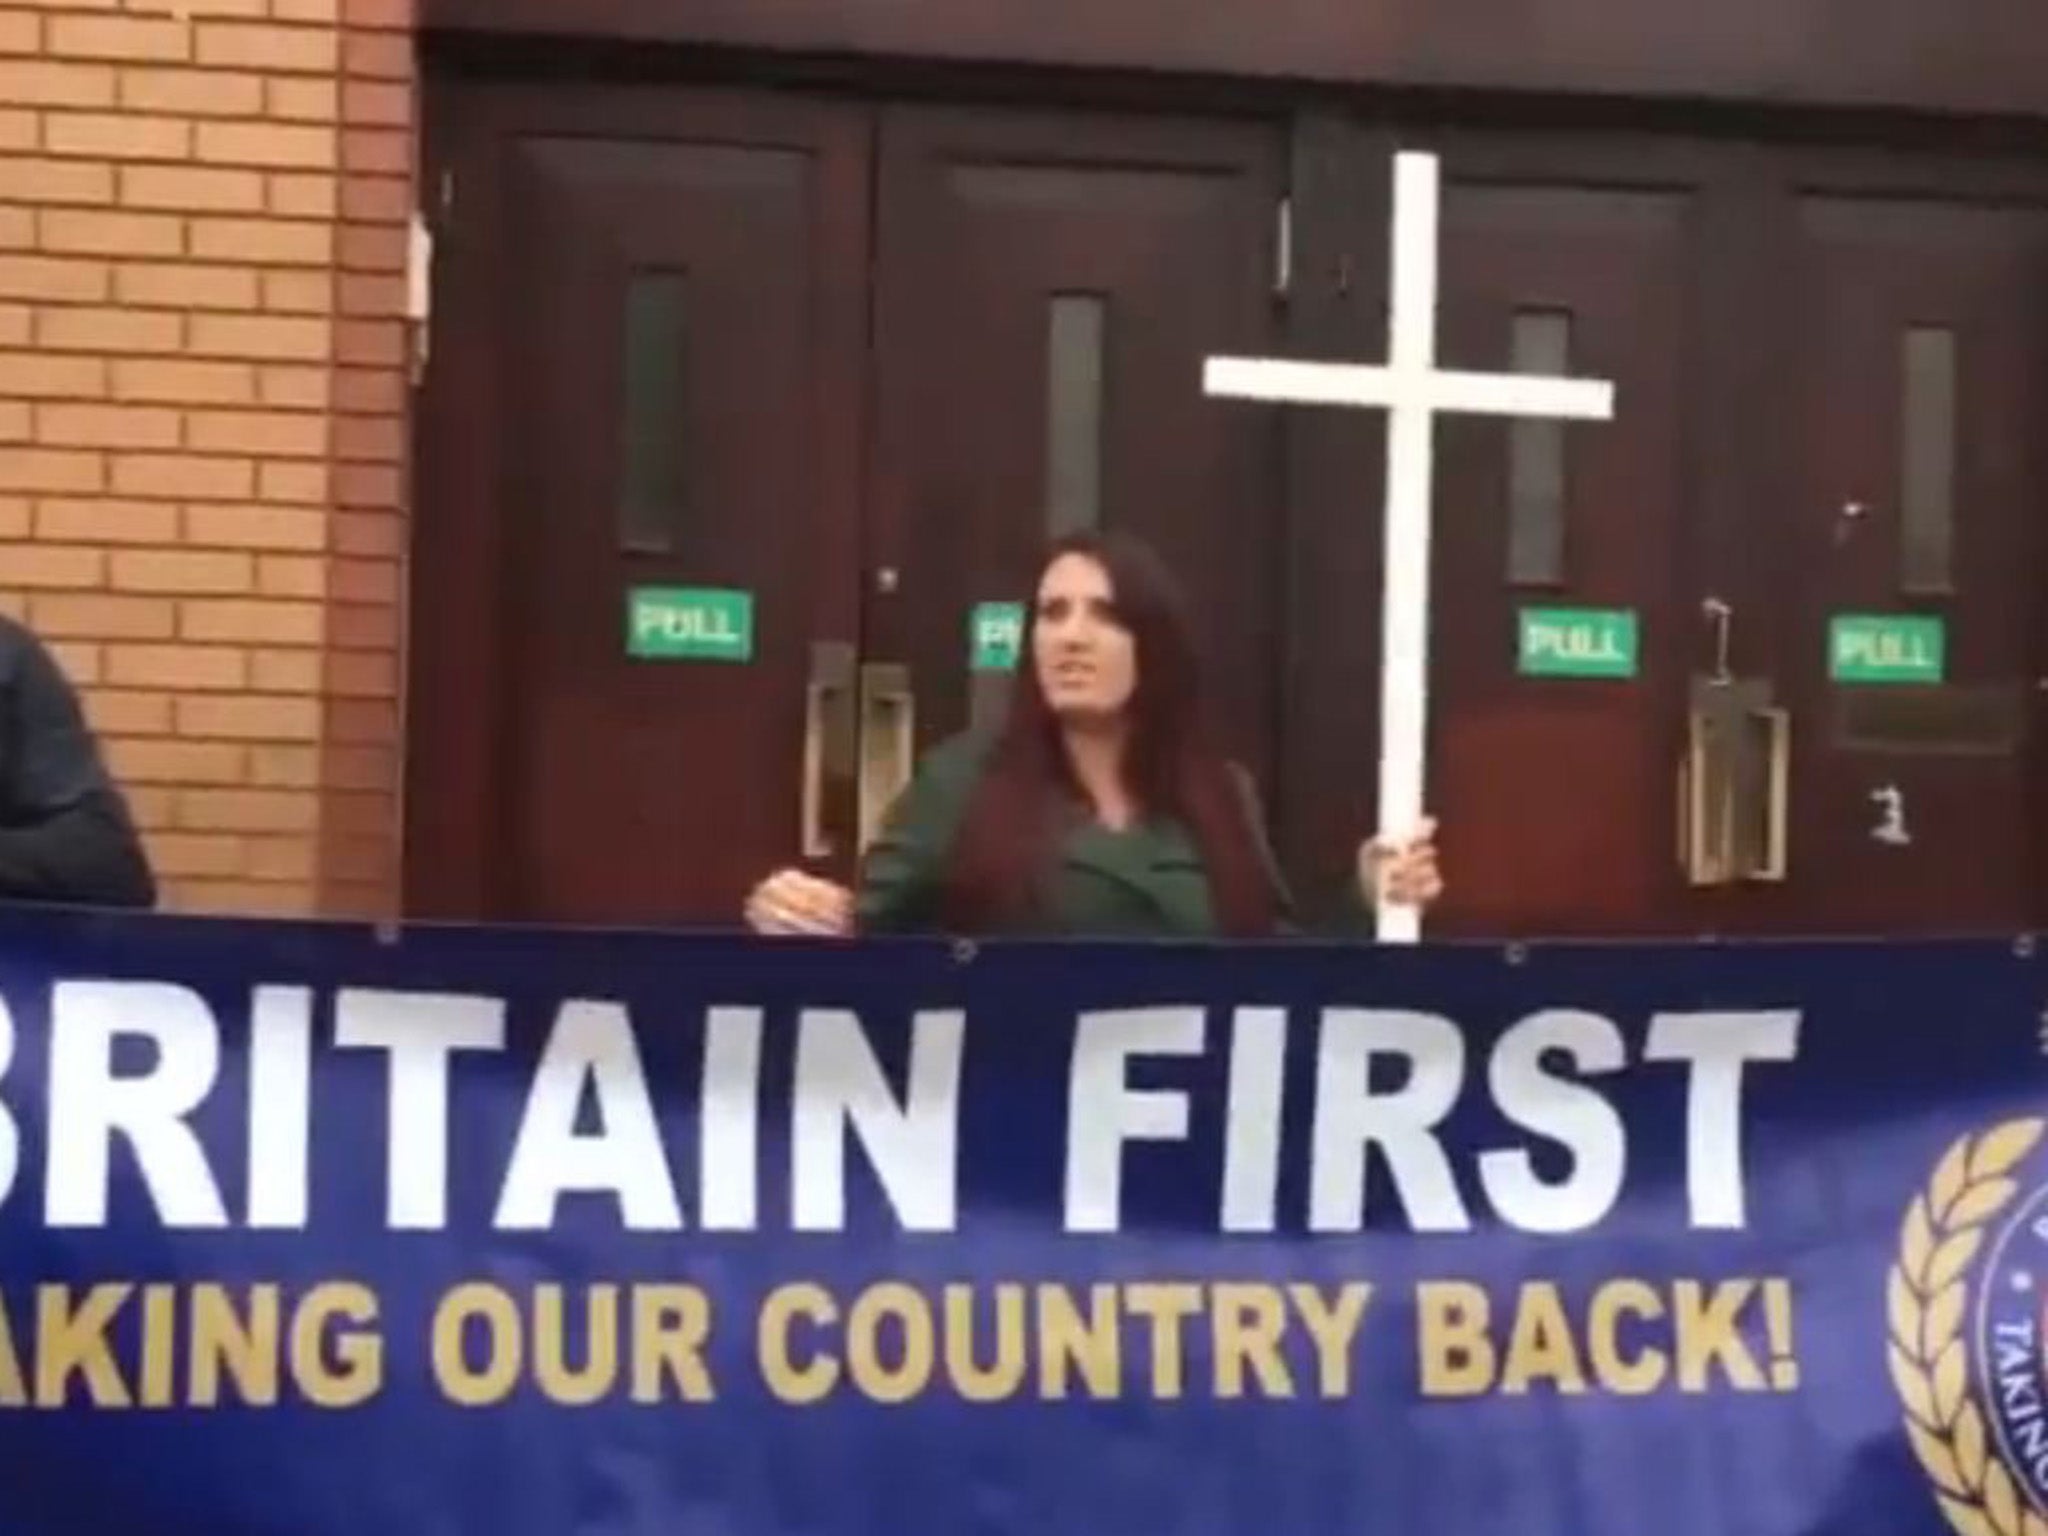 Britain First protesters picketing out a London mosque